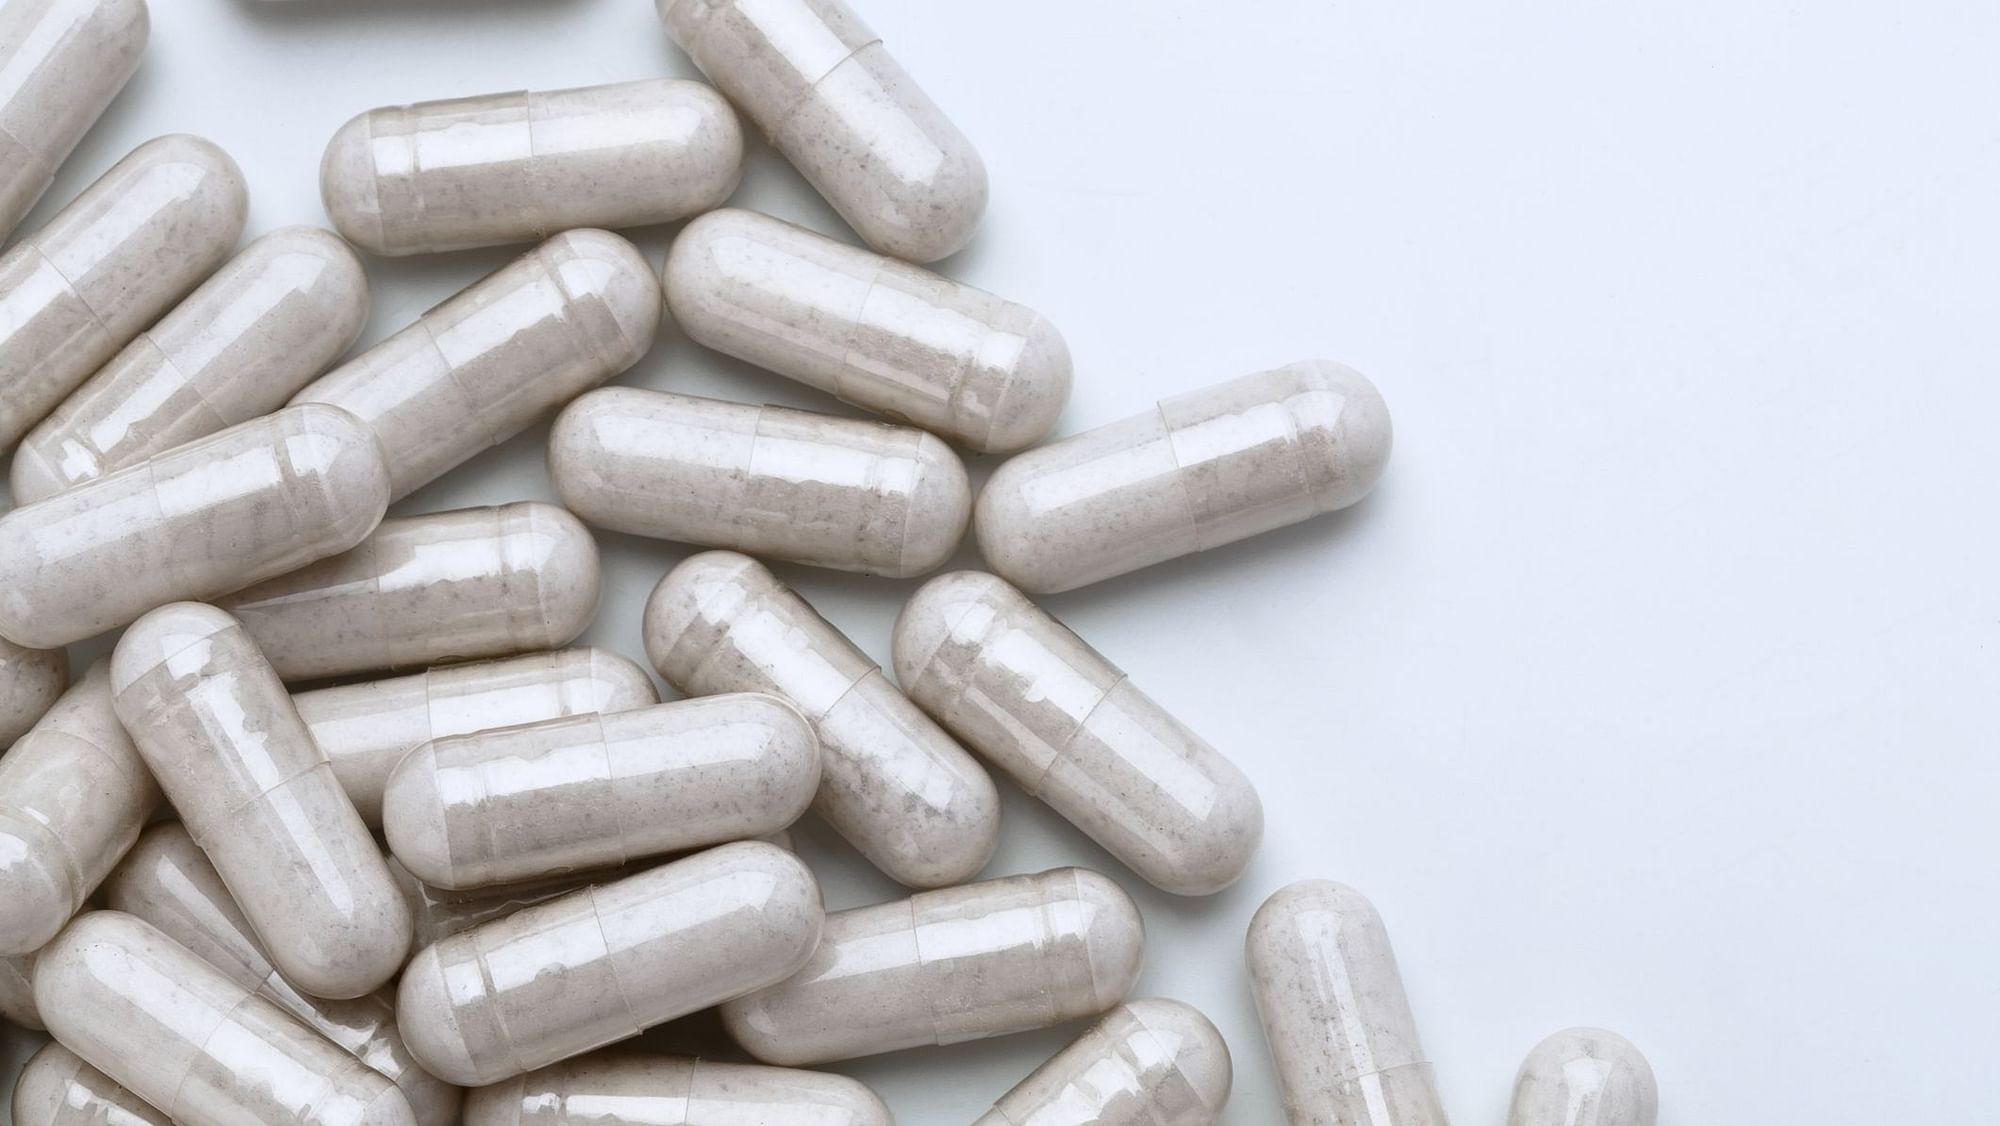 A probiotic supplement may help reduce inflammation of the gut.